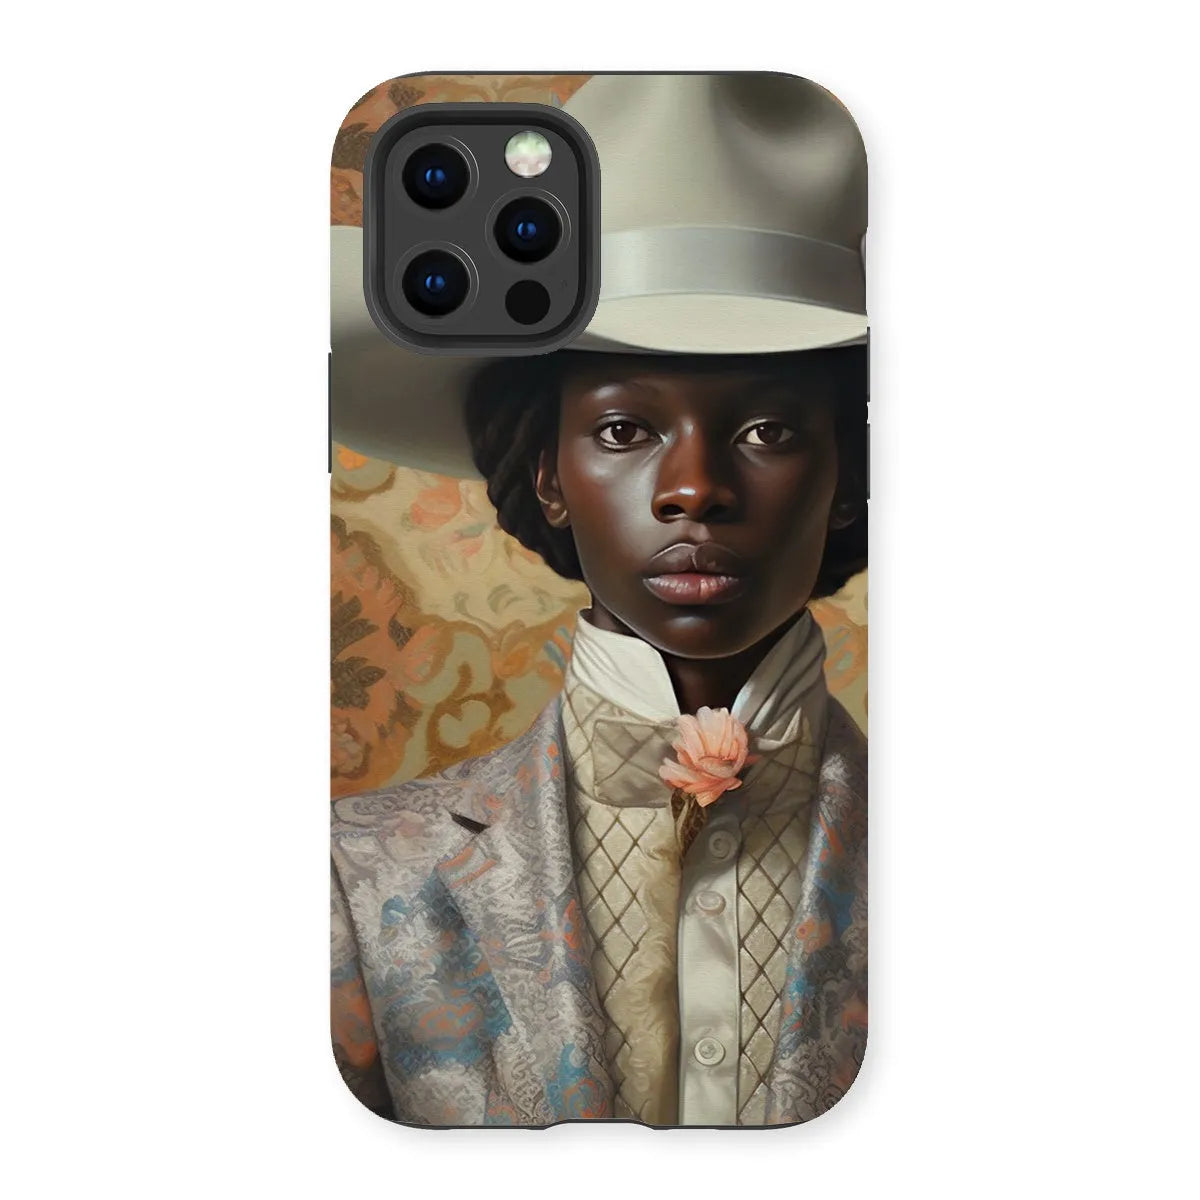 Caesar The Gay Cowboy - Gay Aesthetic Art Phone Case - Iphone 13 Pro / Matte - Mobile Phone Cases - Aesthetic Art